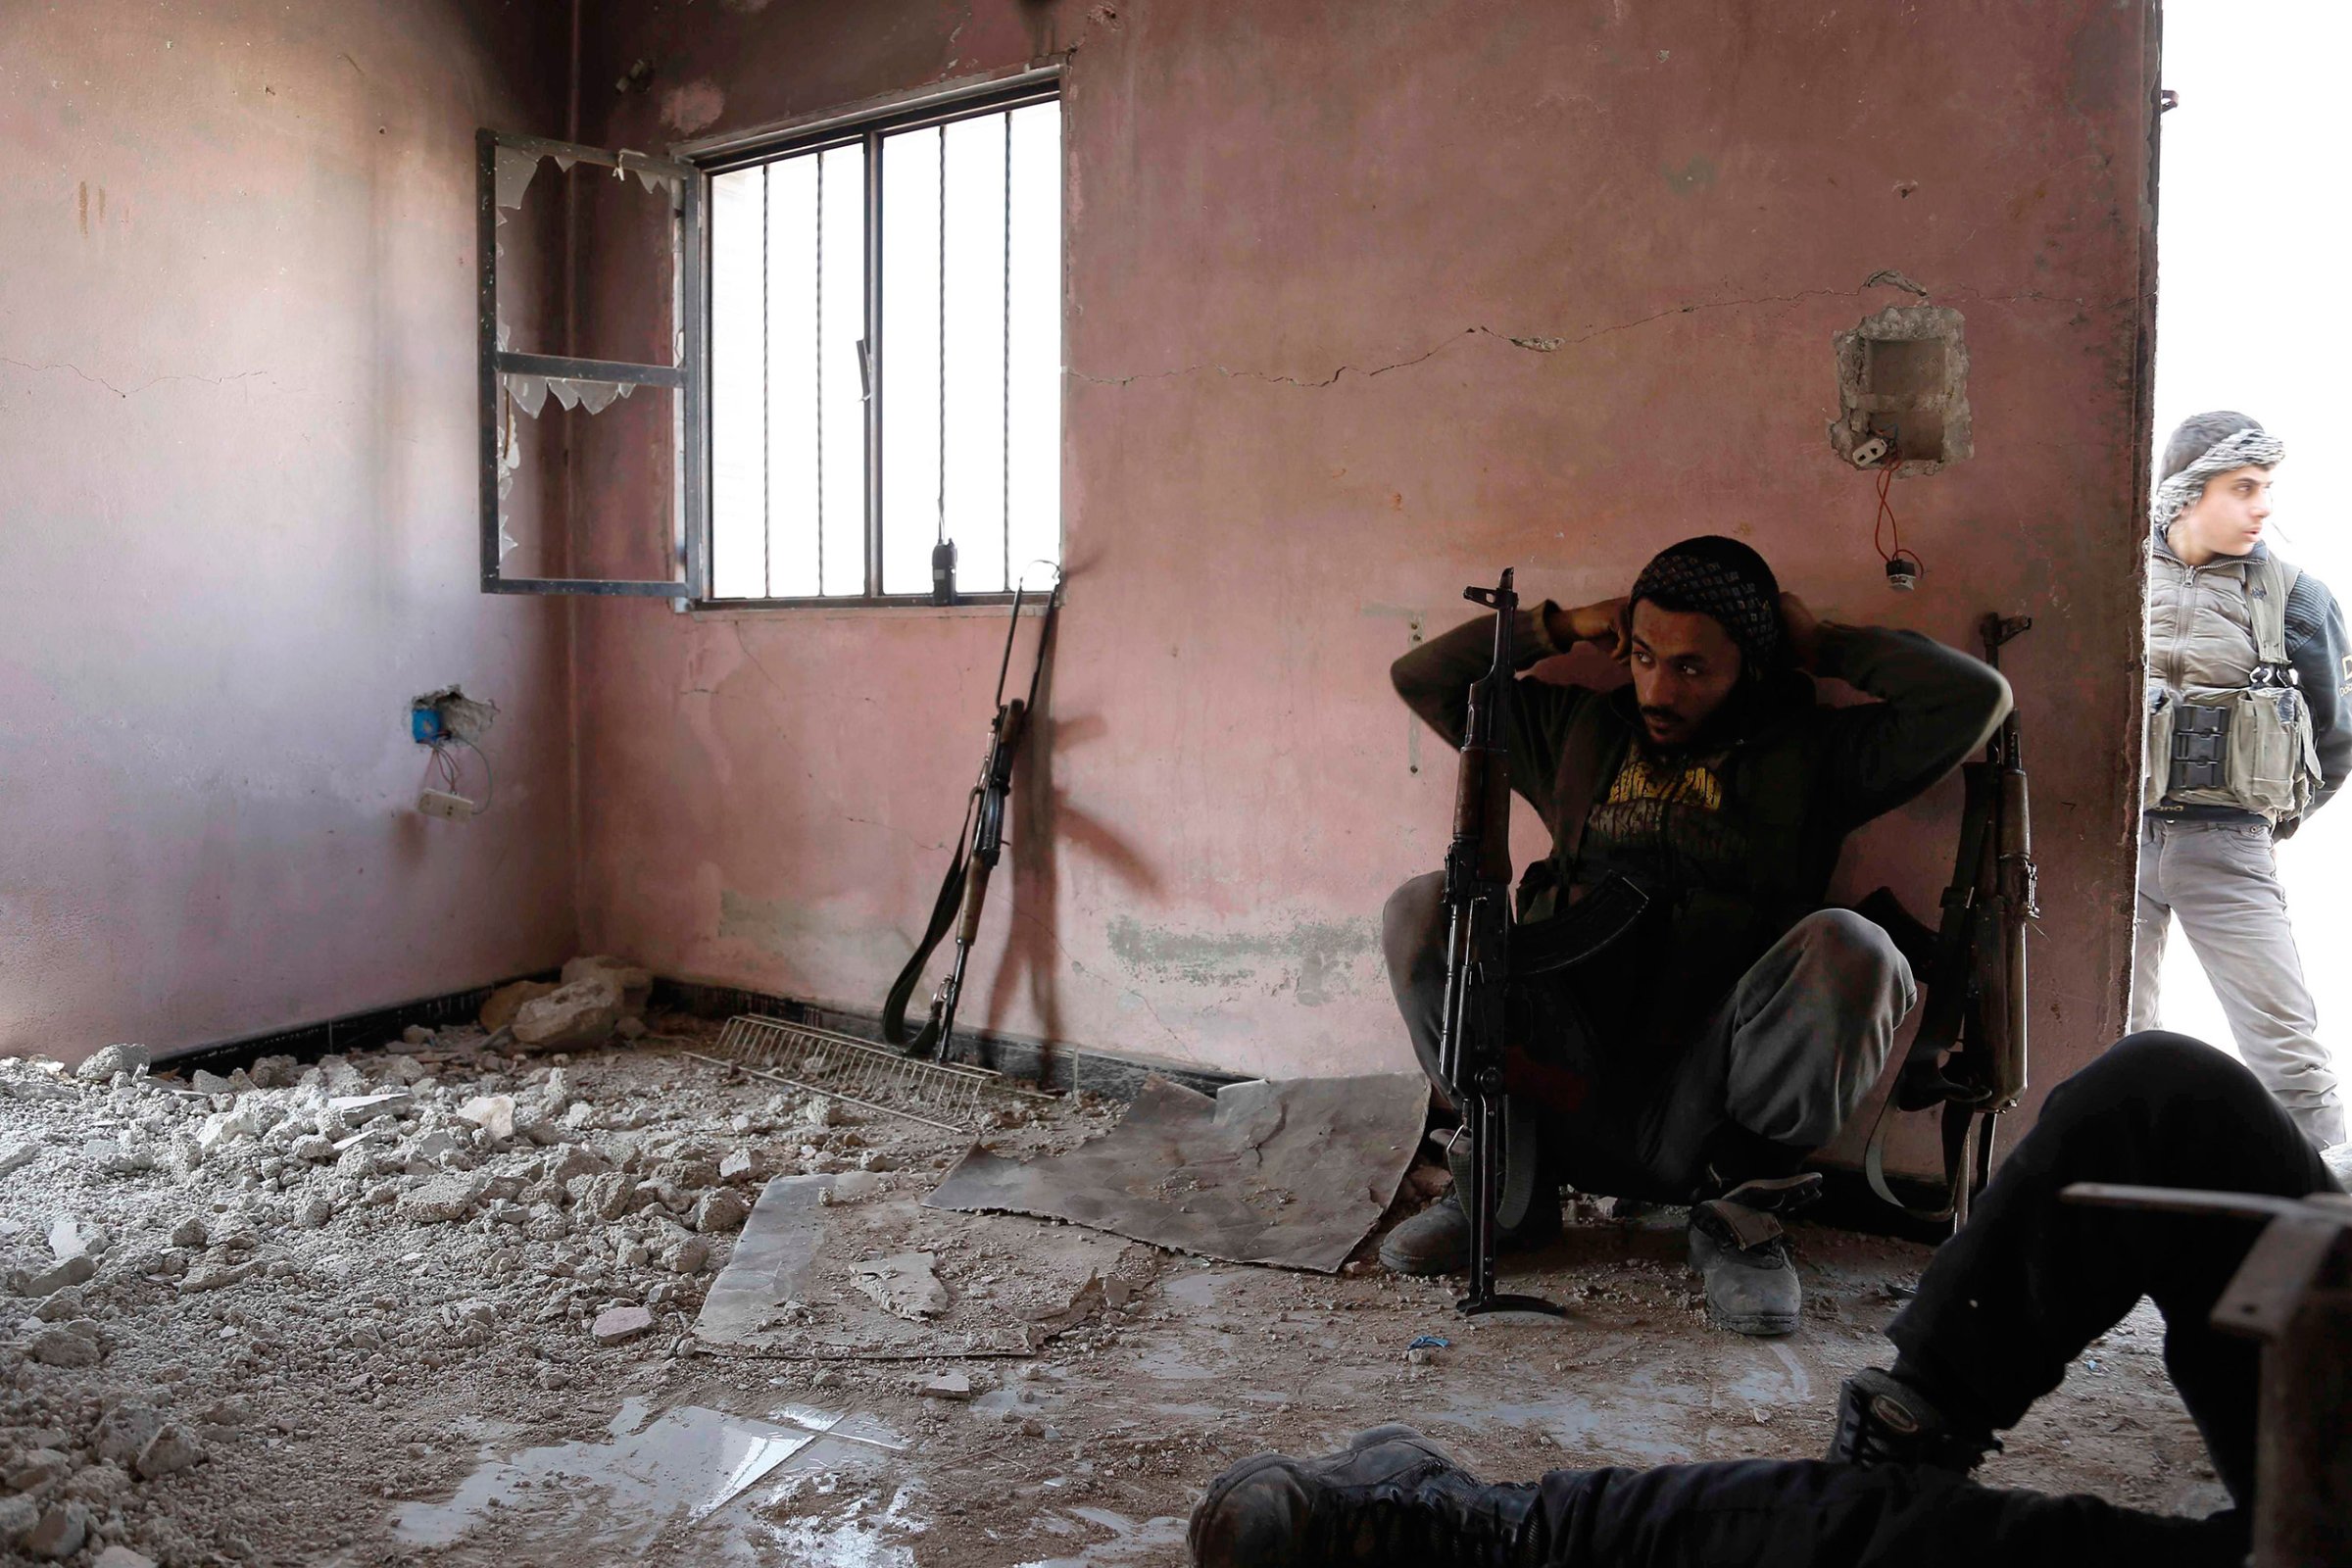 Rebel fighters from the Failaq al-Rahman brigade take a break as they hide inside a building on the frontline against regime forces in the rebel-controlled village of Bala, on the outskirts of Damascus, Syria, Feb. 28, 2016.